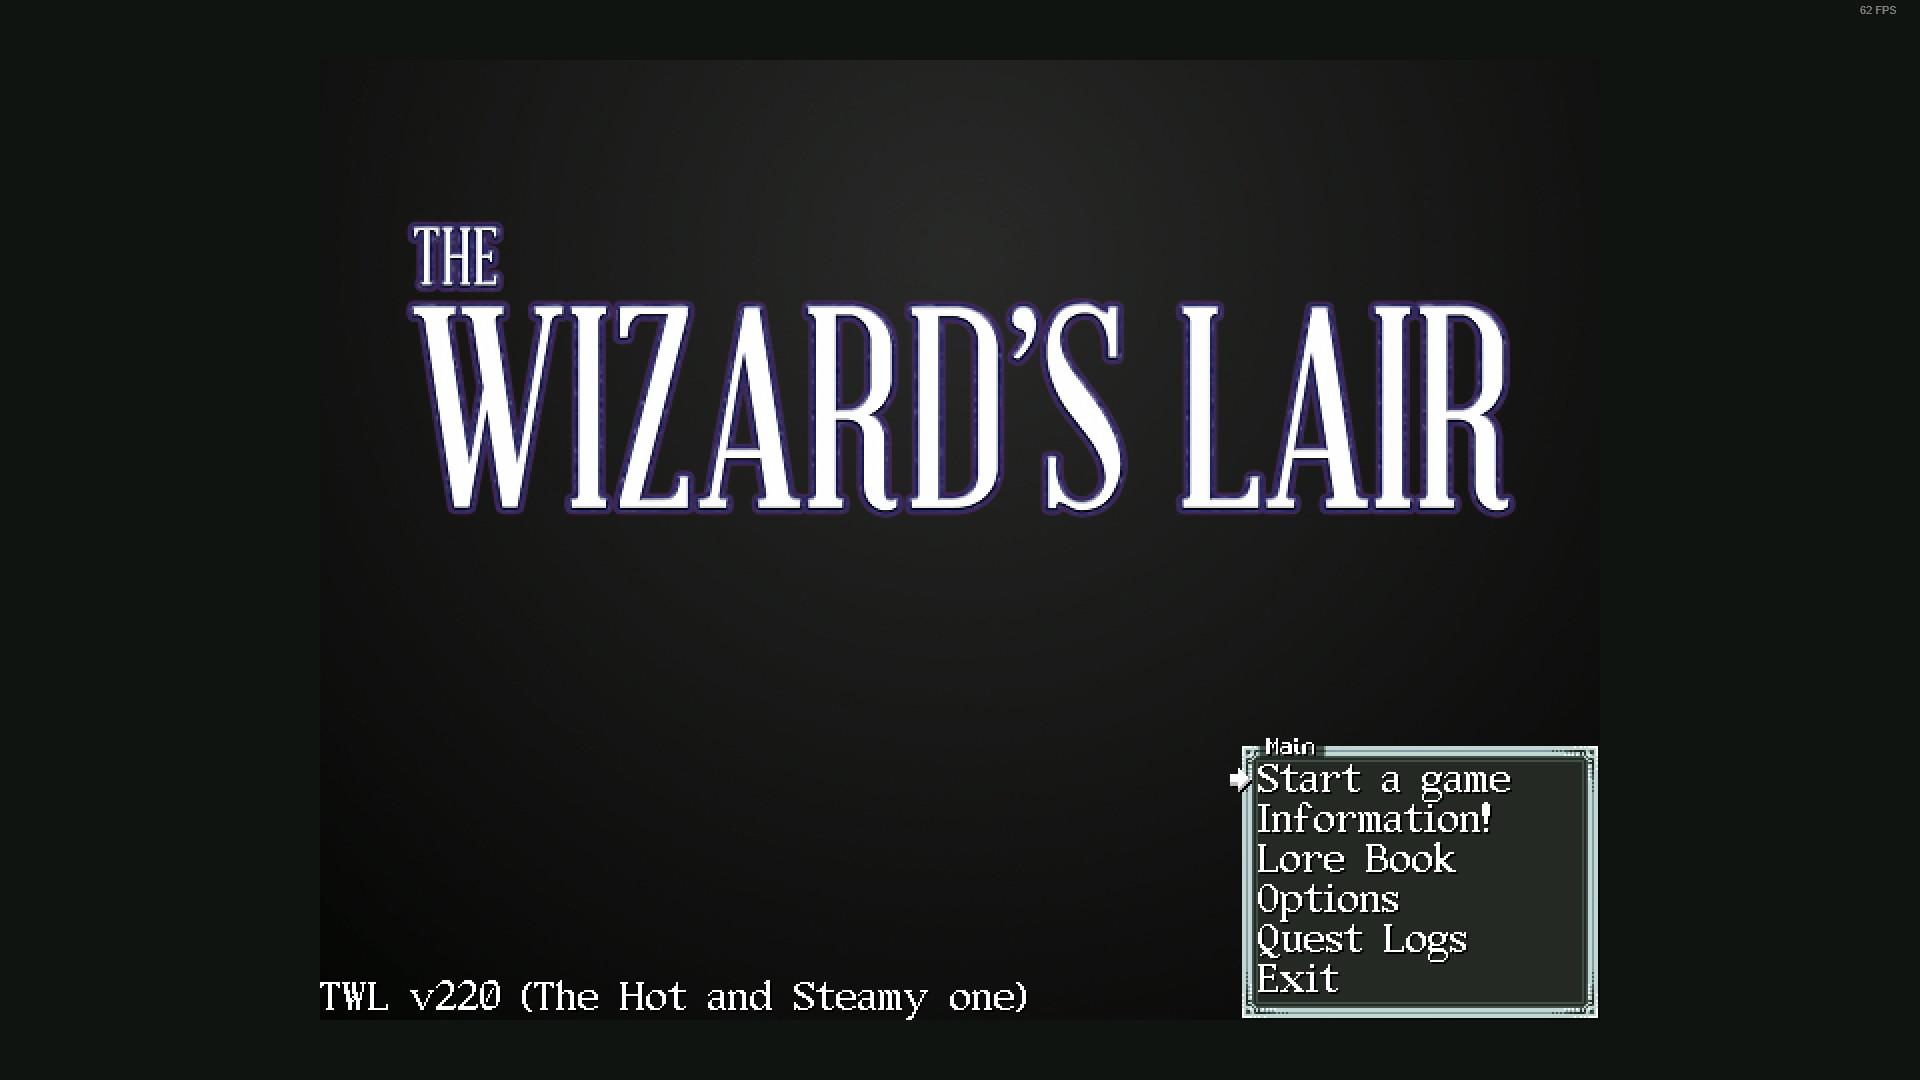 Screenshot №1 from game The Wizard's Lair